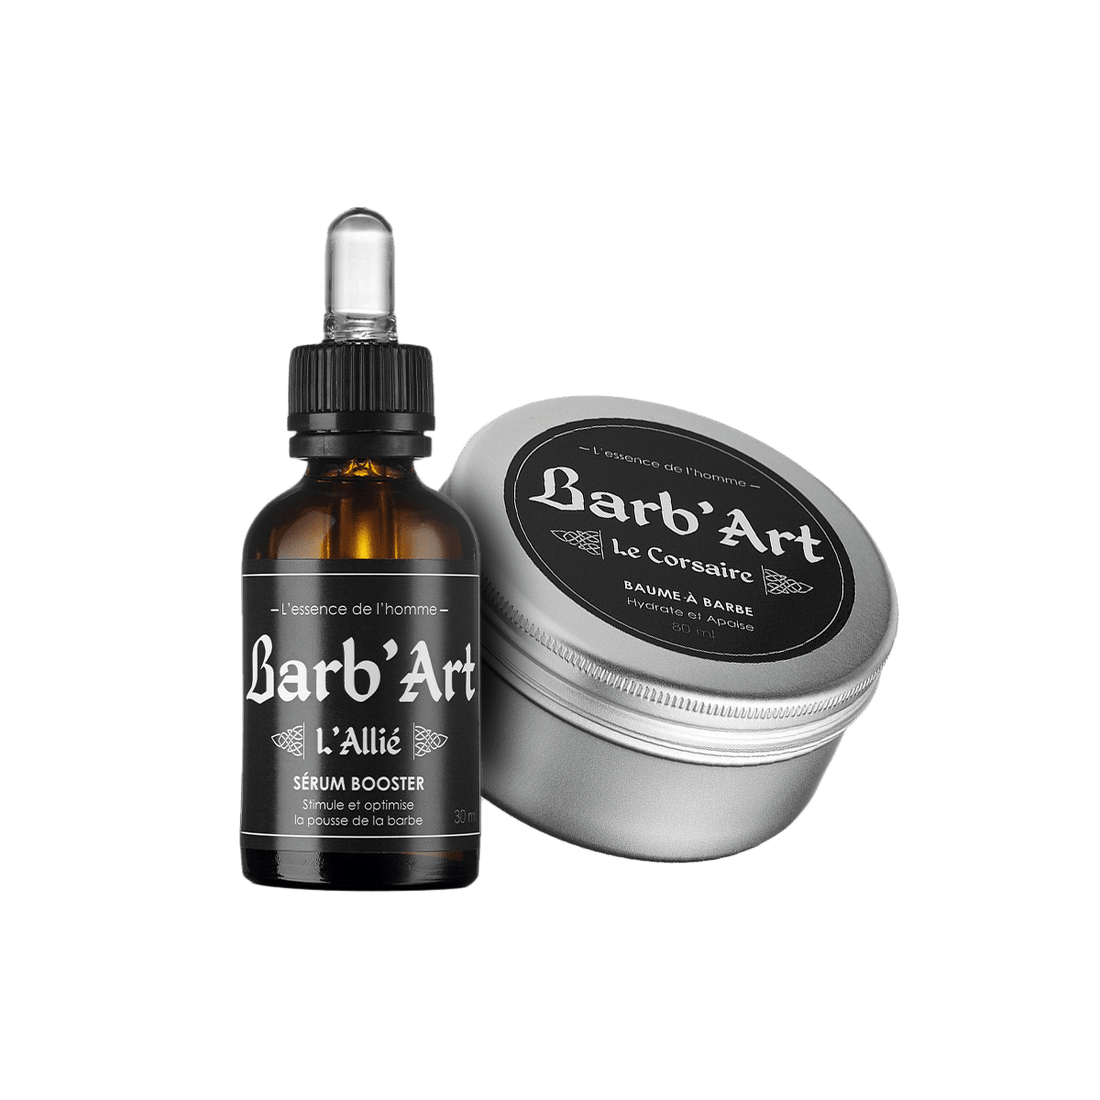 Kit barbe - Sérum Booster Soin Fortifiant Barbe &amp; Baume à Barbe - barbartfr